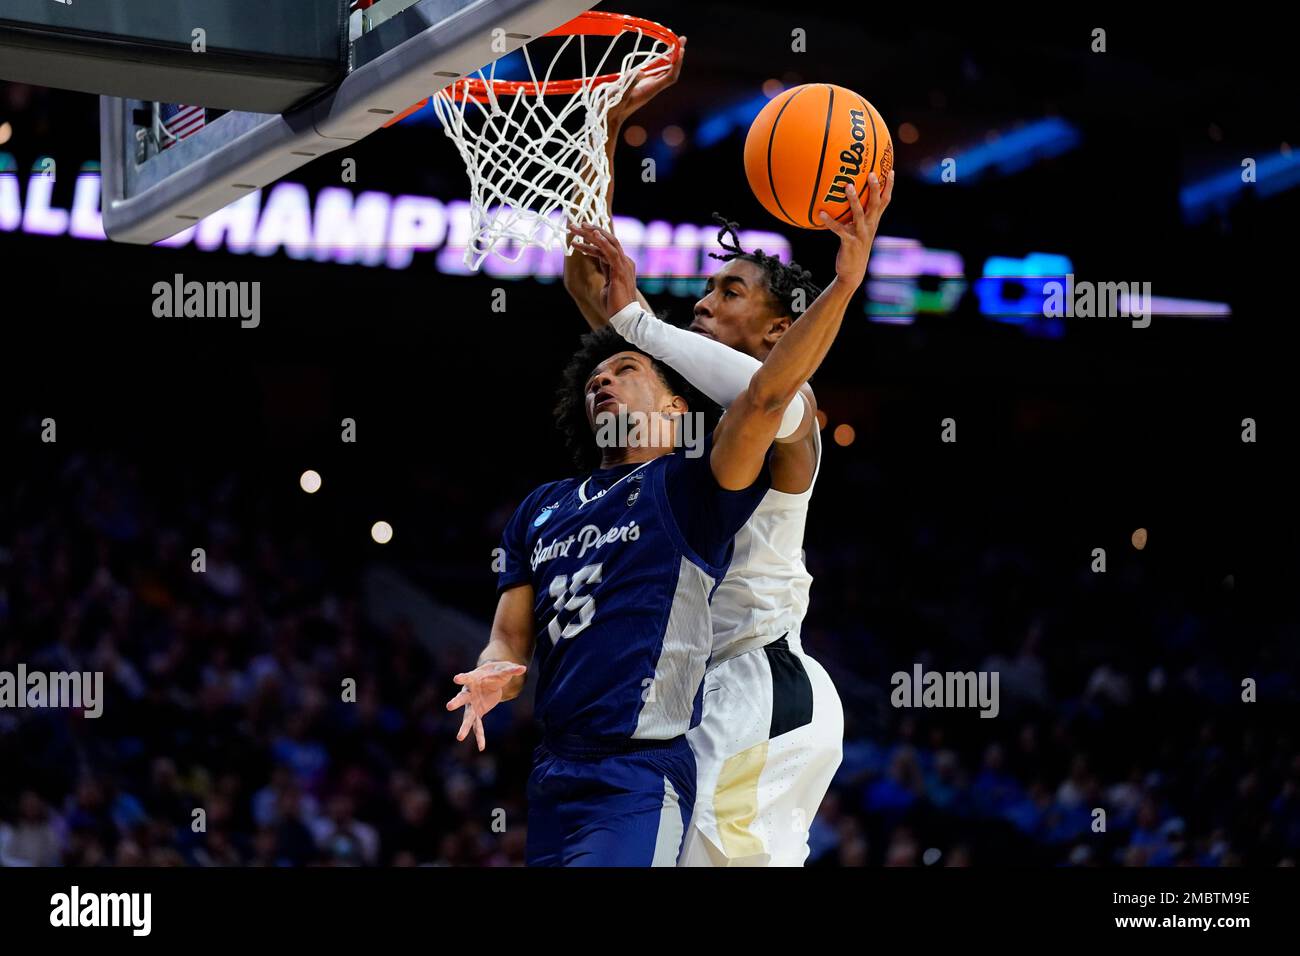 Saint Peter's Matthew Lee, left, goes up for a shot against Purdue's Jaden  Ivey during the first half of a college basketball game in the Sweet 16  round of the NCAA tournament,